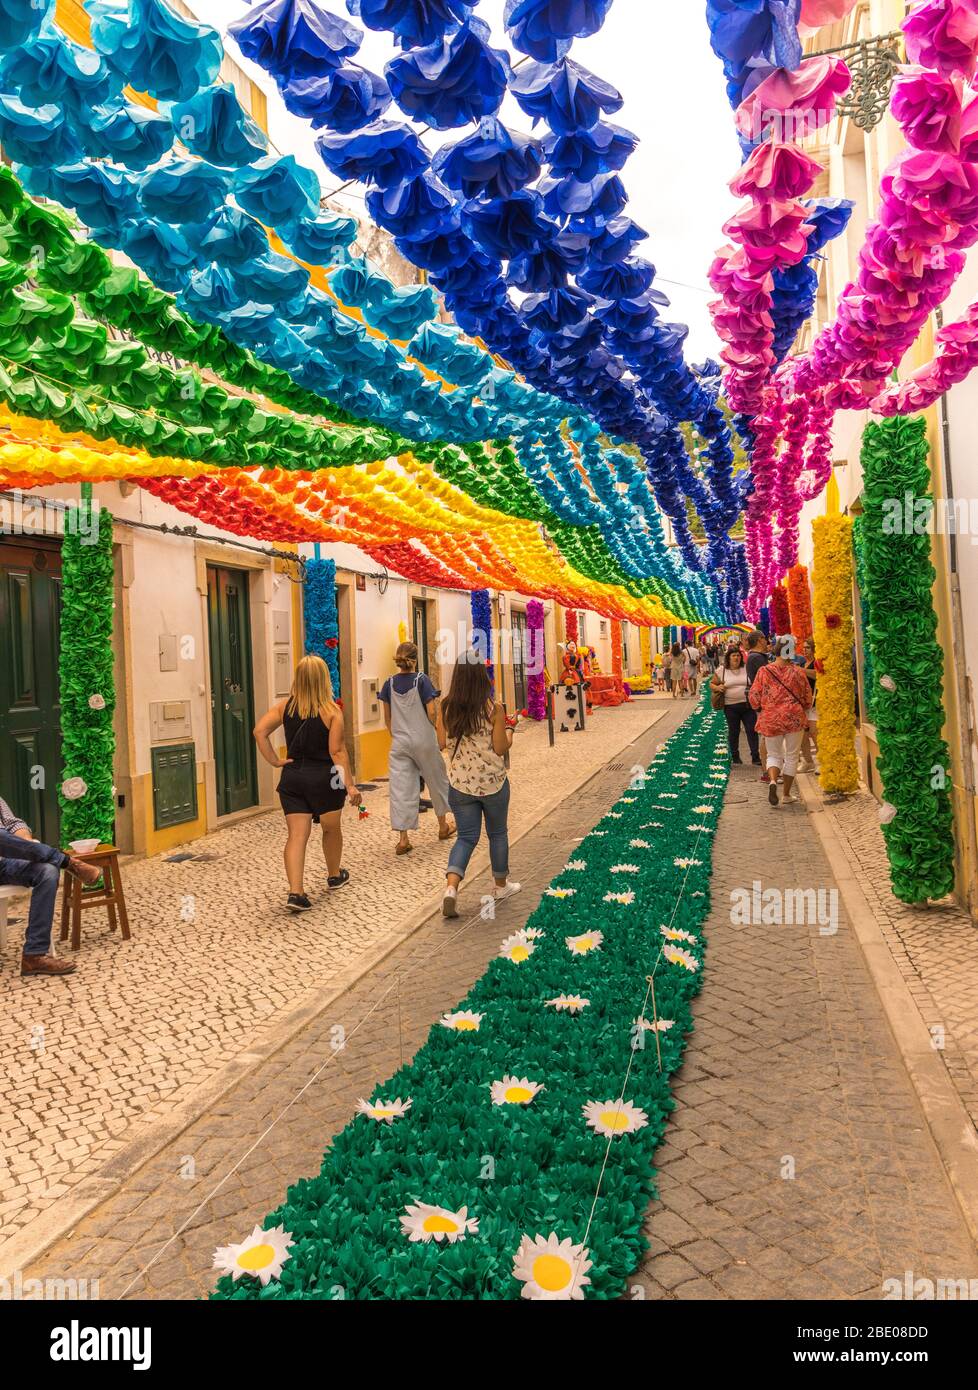 People walking down a highly decorated street in Tomar during the traditional Festa dos Tabuleiros (Festival of the Trays). Portugal Stock Photo